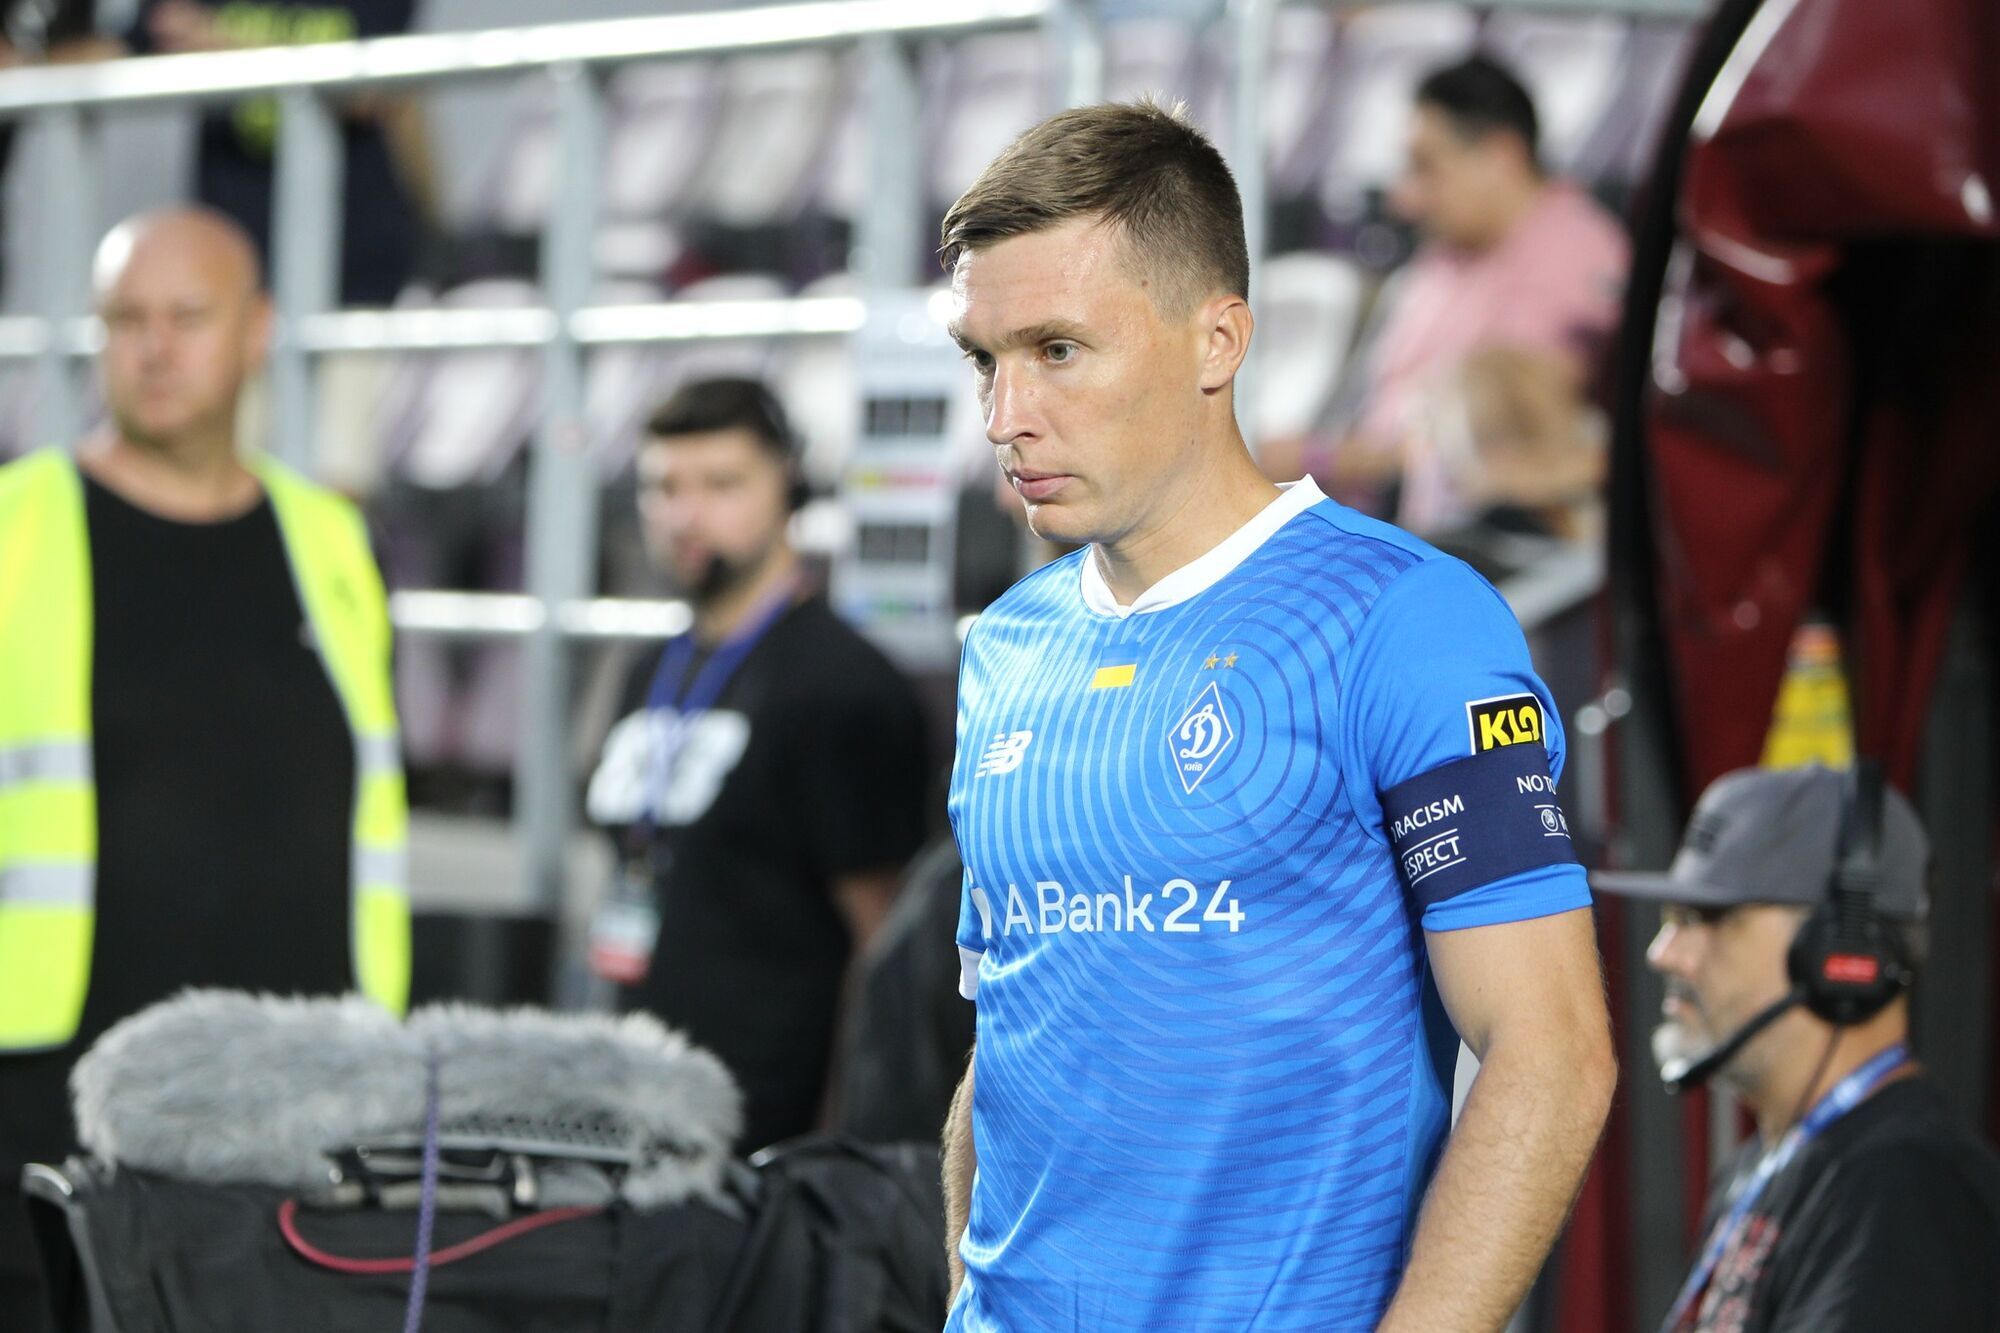 The former Dynamo captain has a rival in his new club who refused to play for Ukraine for the sake of Russia